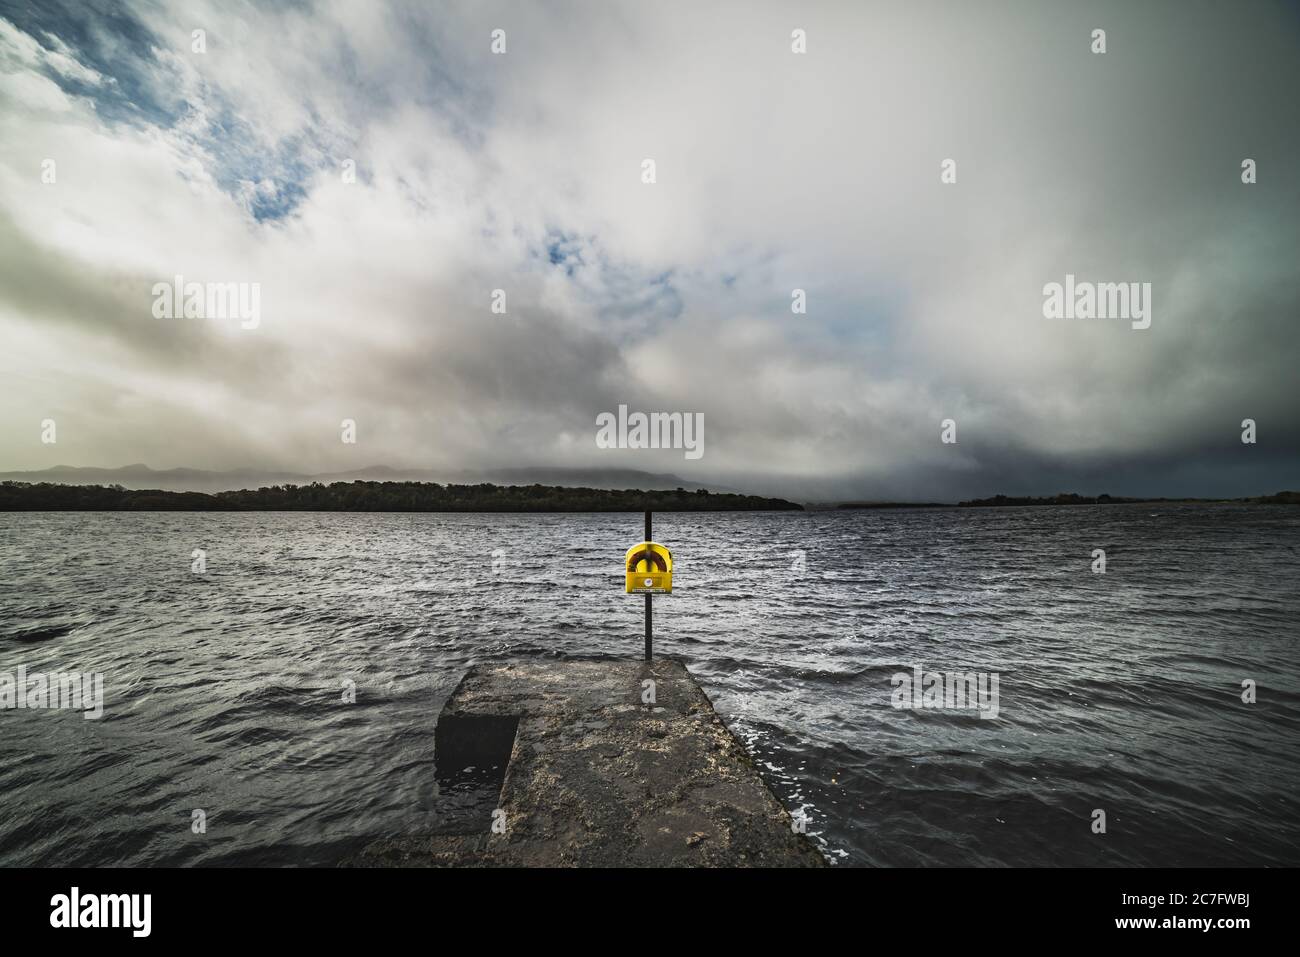 A ring buoy stands alone by Lough Melvin amid despair, helplessness and isolation. A life preserver by a stormy lake conveys grim and dramatic feeling Stock Photo